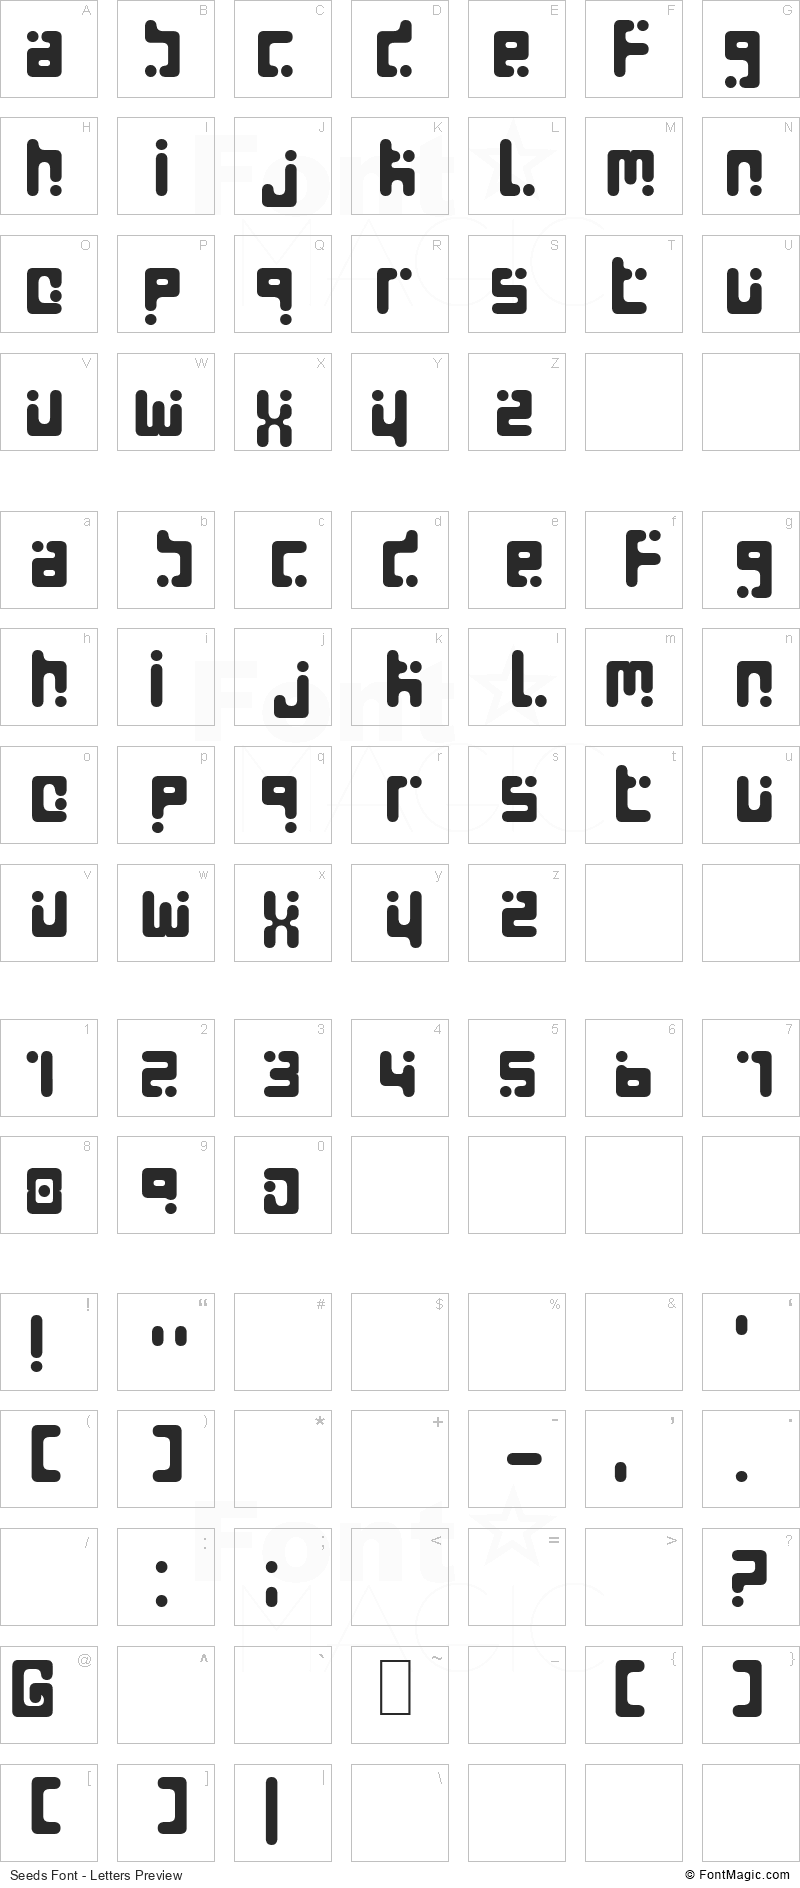 Seeds Font - All Latters Preview Chart